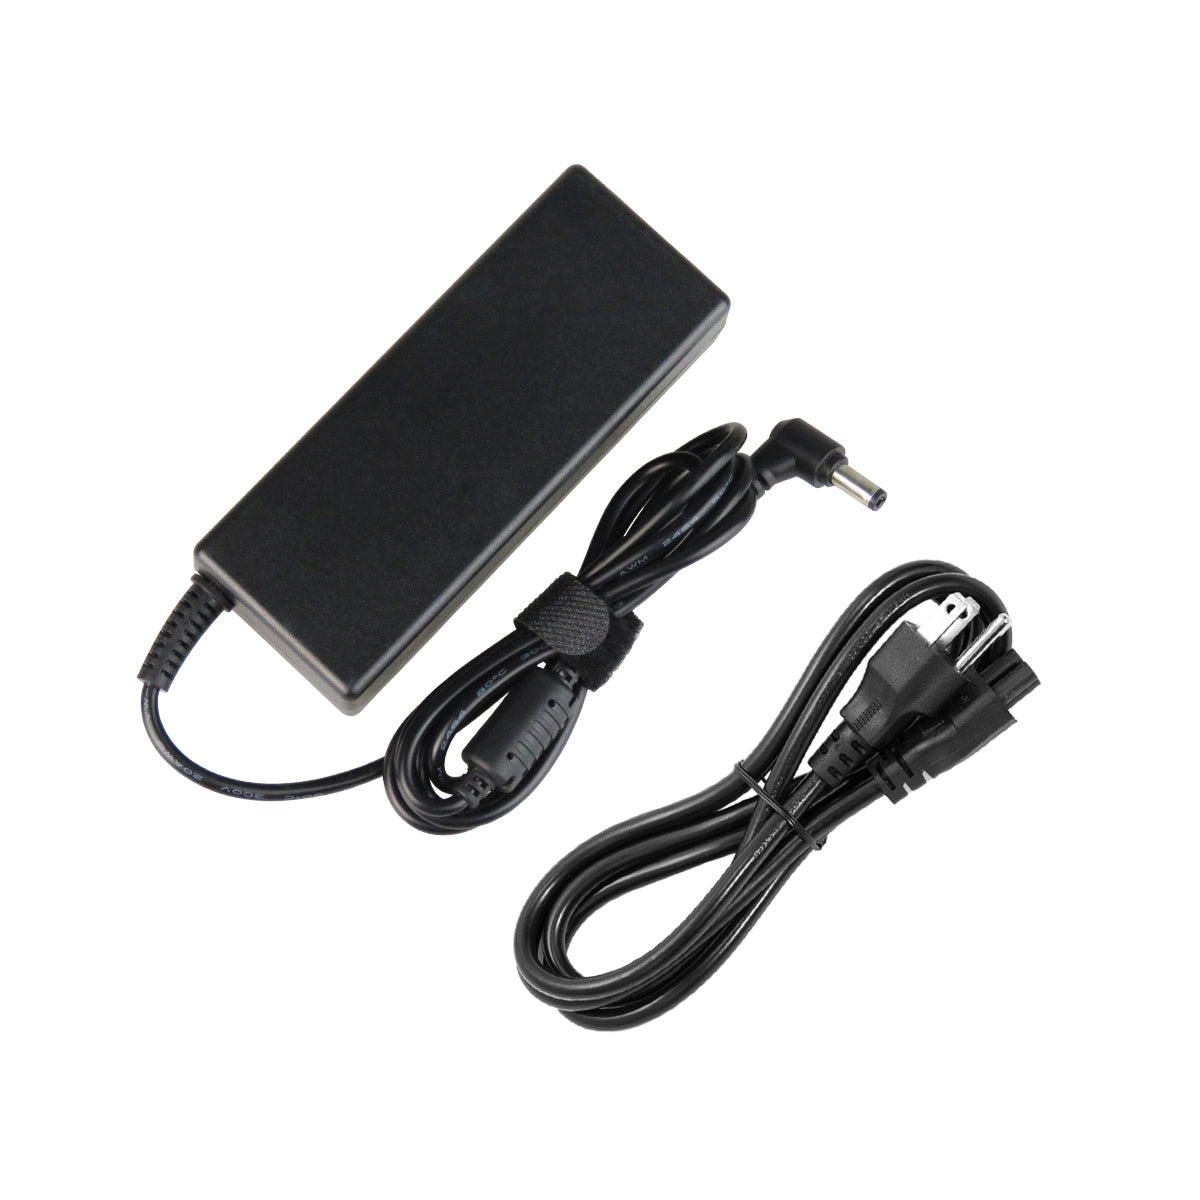 AC Adapter Charger for Lenovo IdeaPad Y580 Notebook.